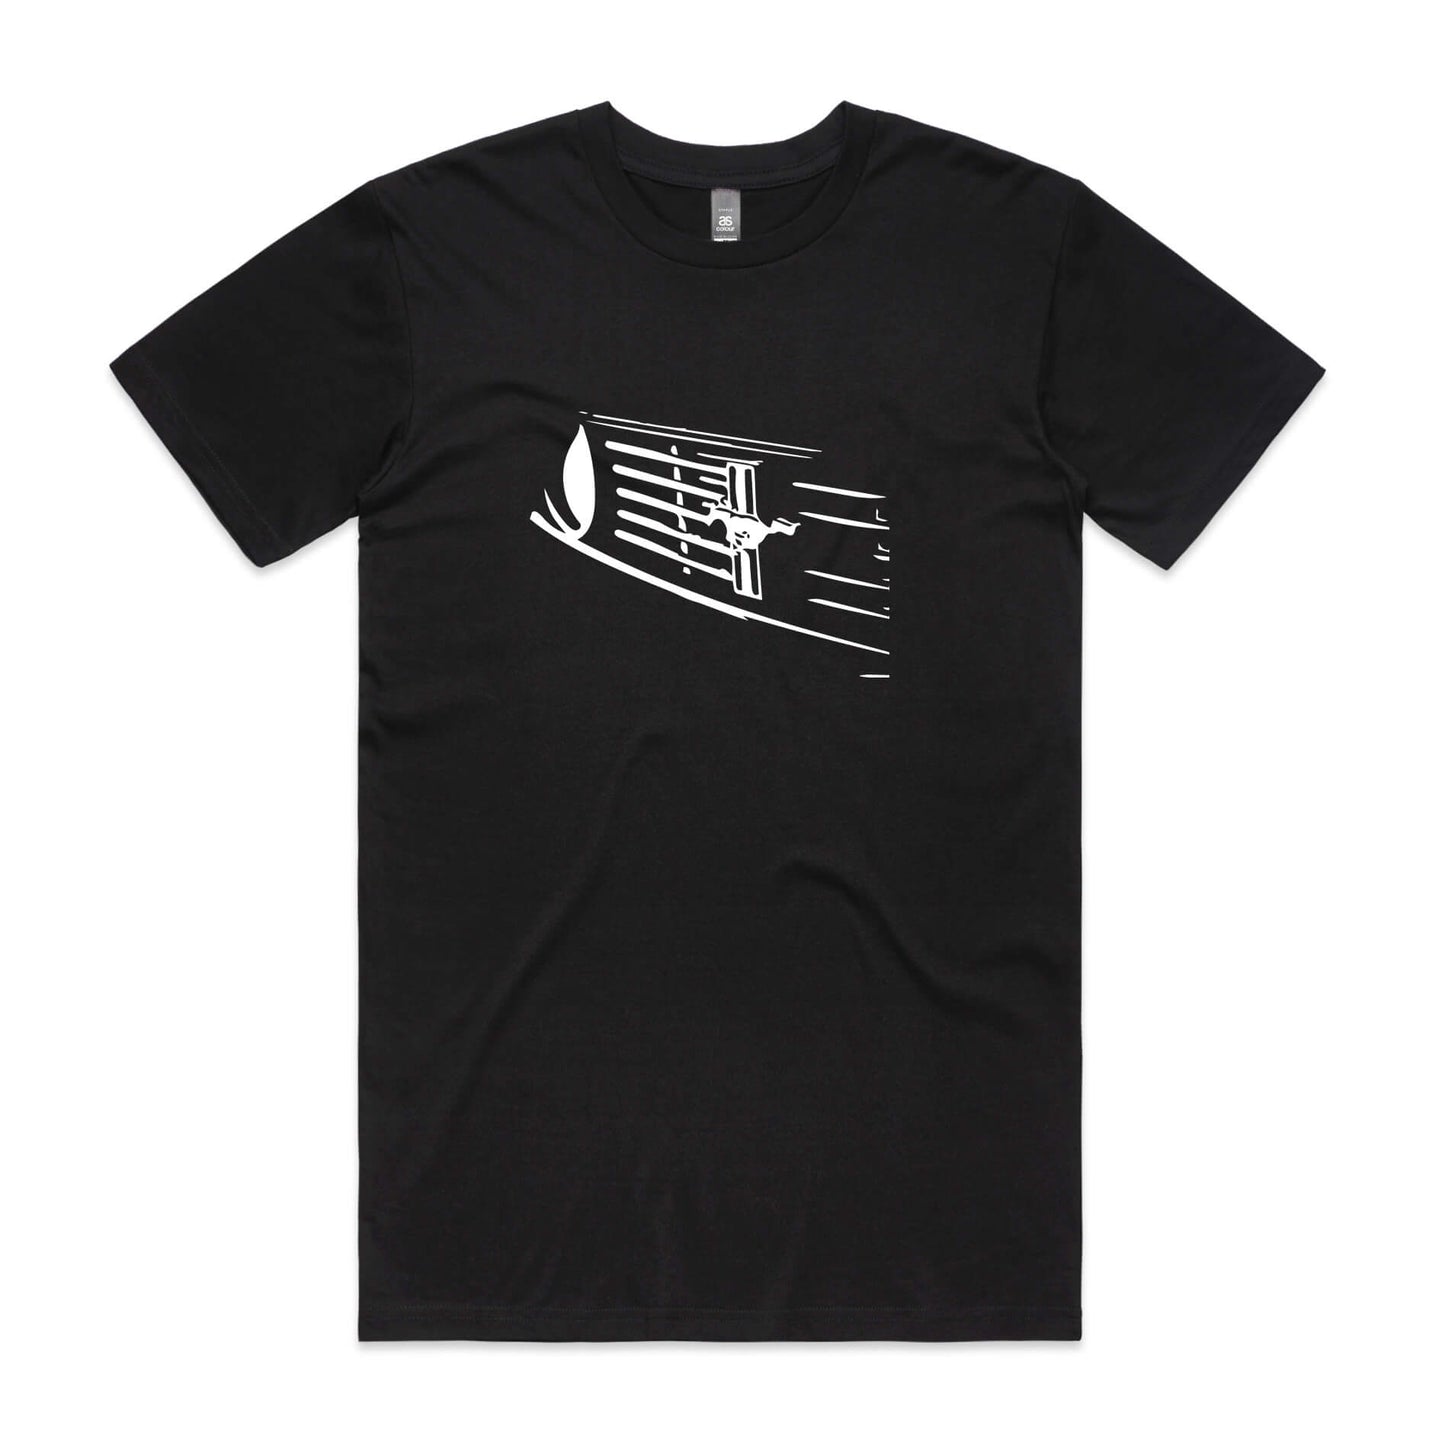 Black t-shirt with abstract Ford Mustang grille and pony badge design in white.